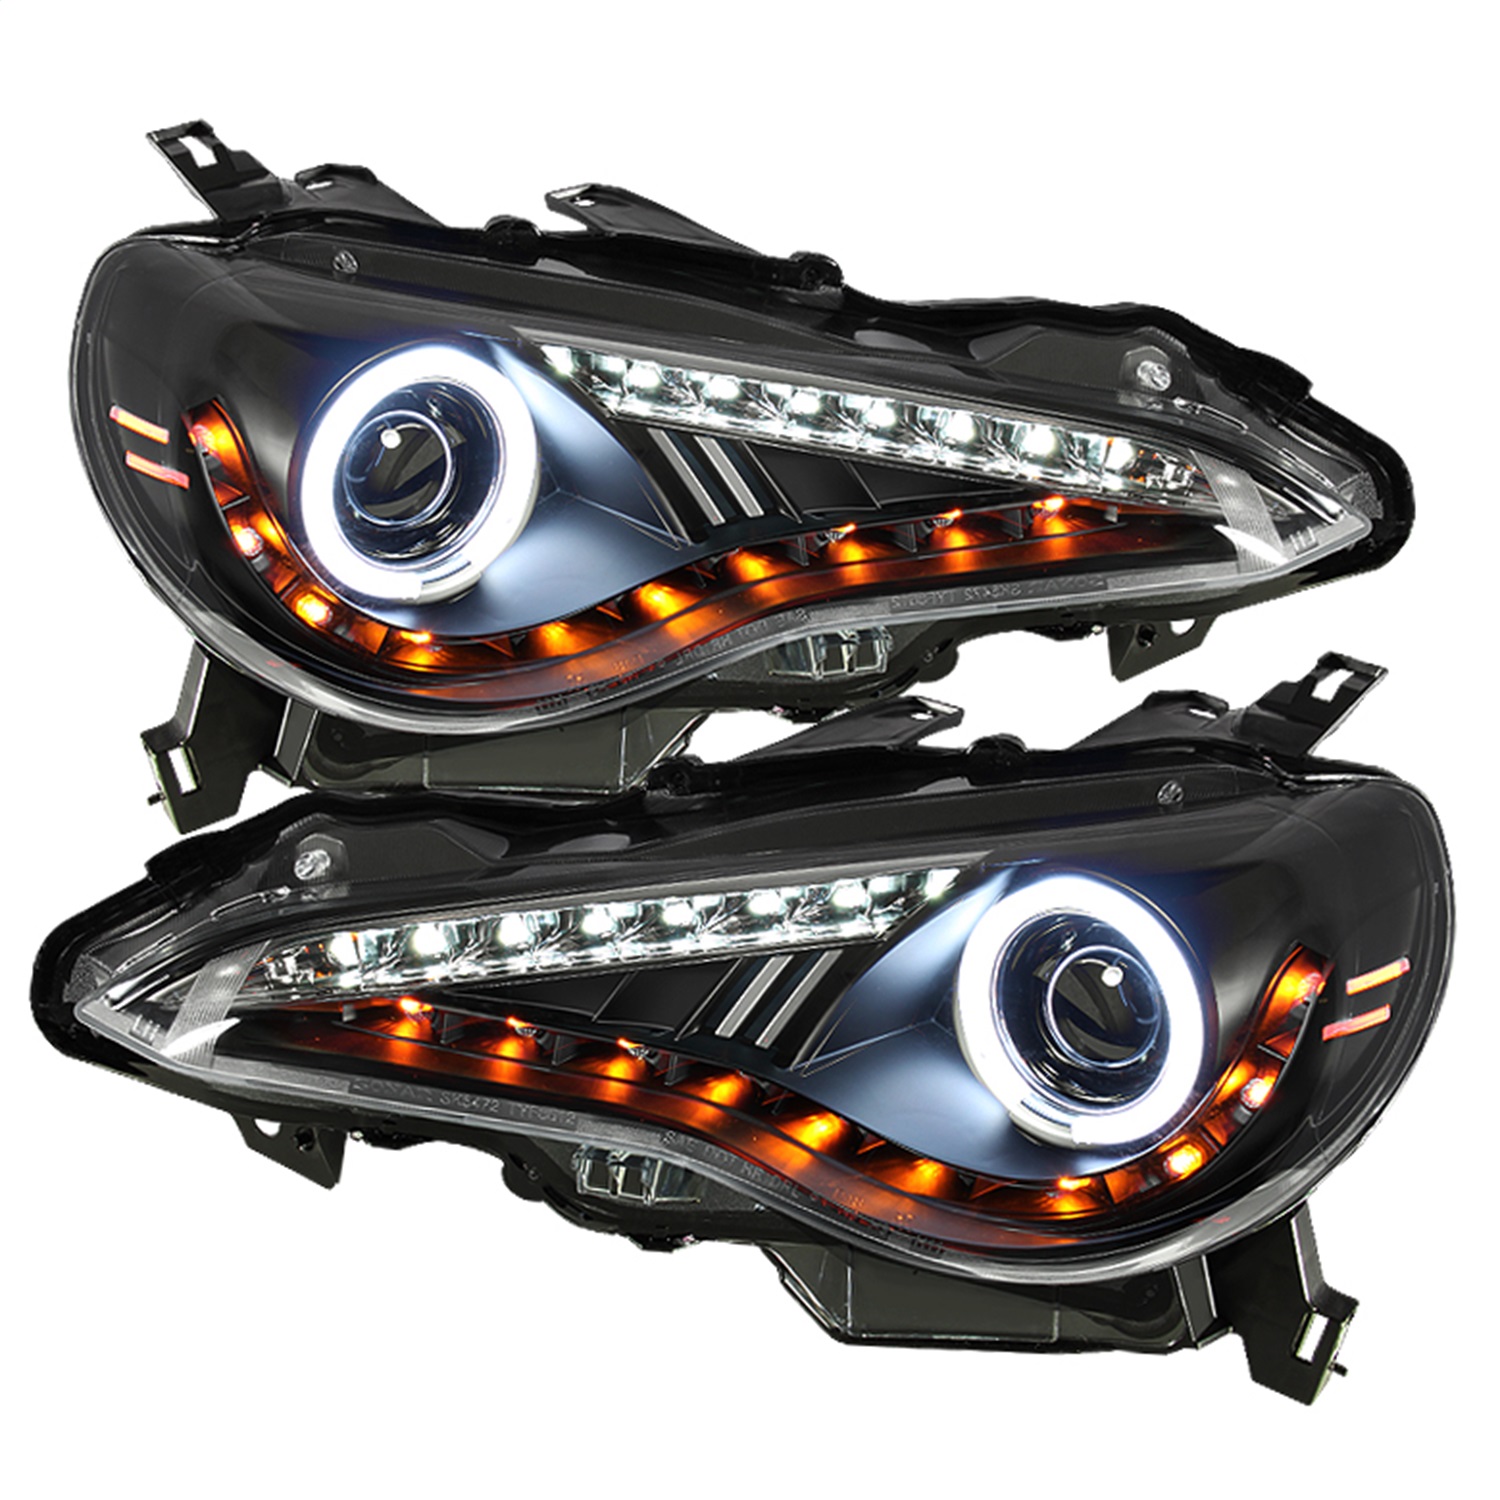 Spyder Auto 5075383 CCFL Halo DRL LED Projector Headlights Fits 13-14 FR-S